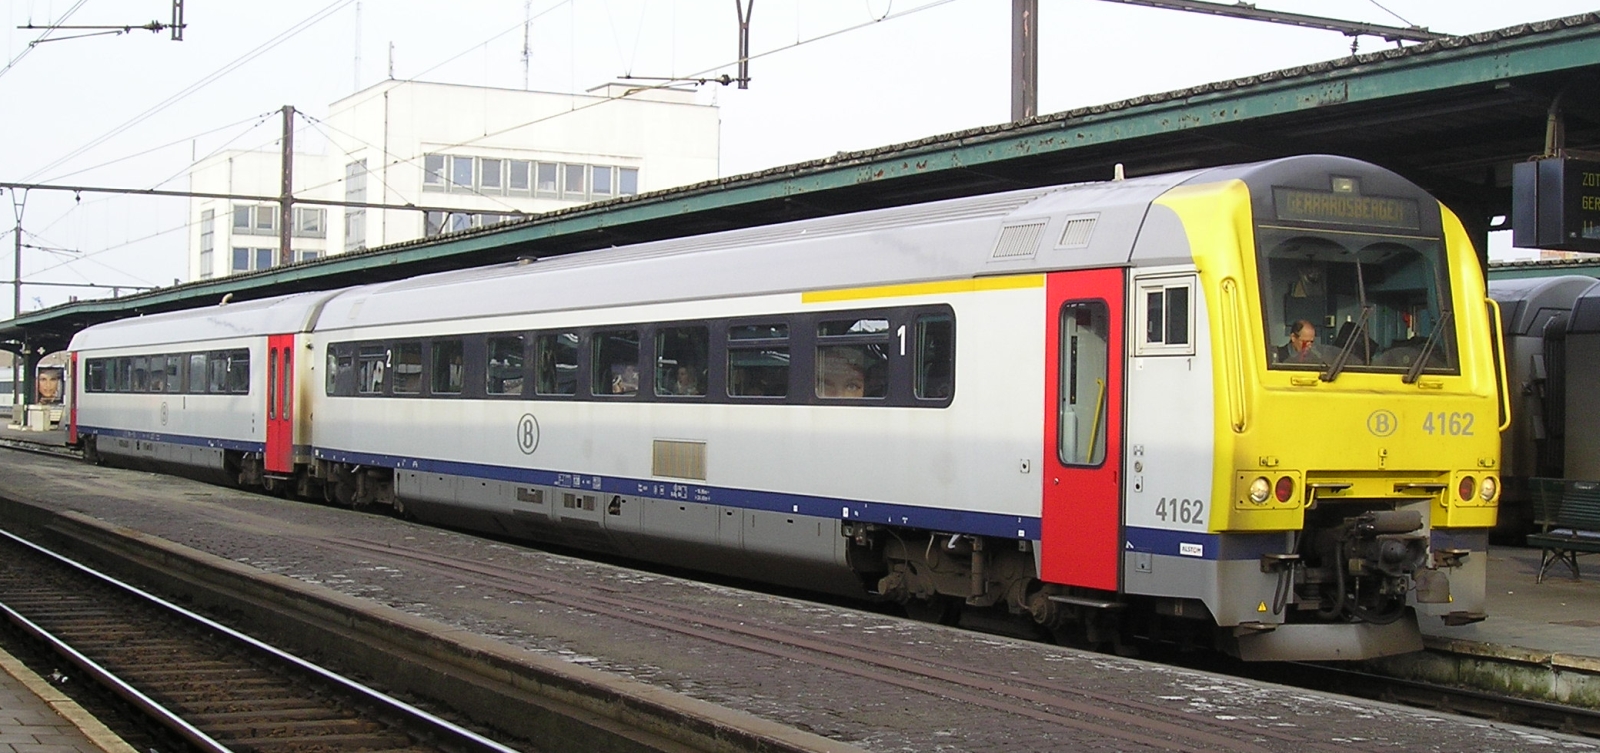 No. 4162 in January 2006 in Ghent Sint-Pieters